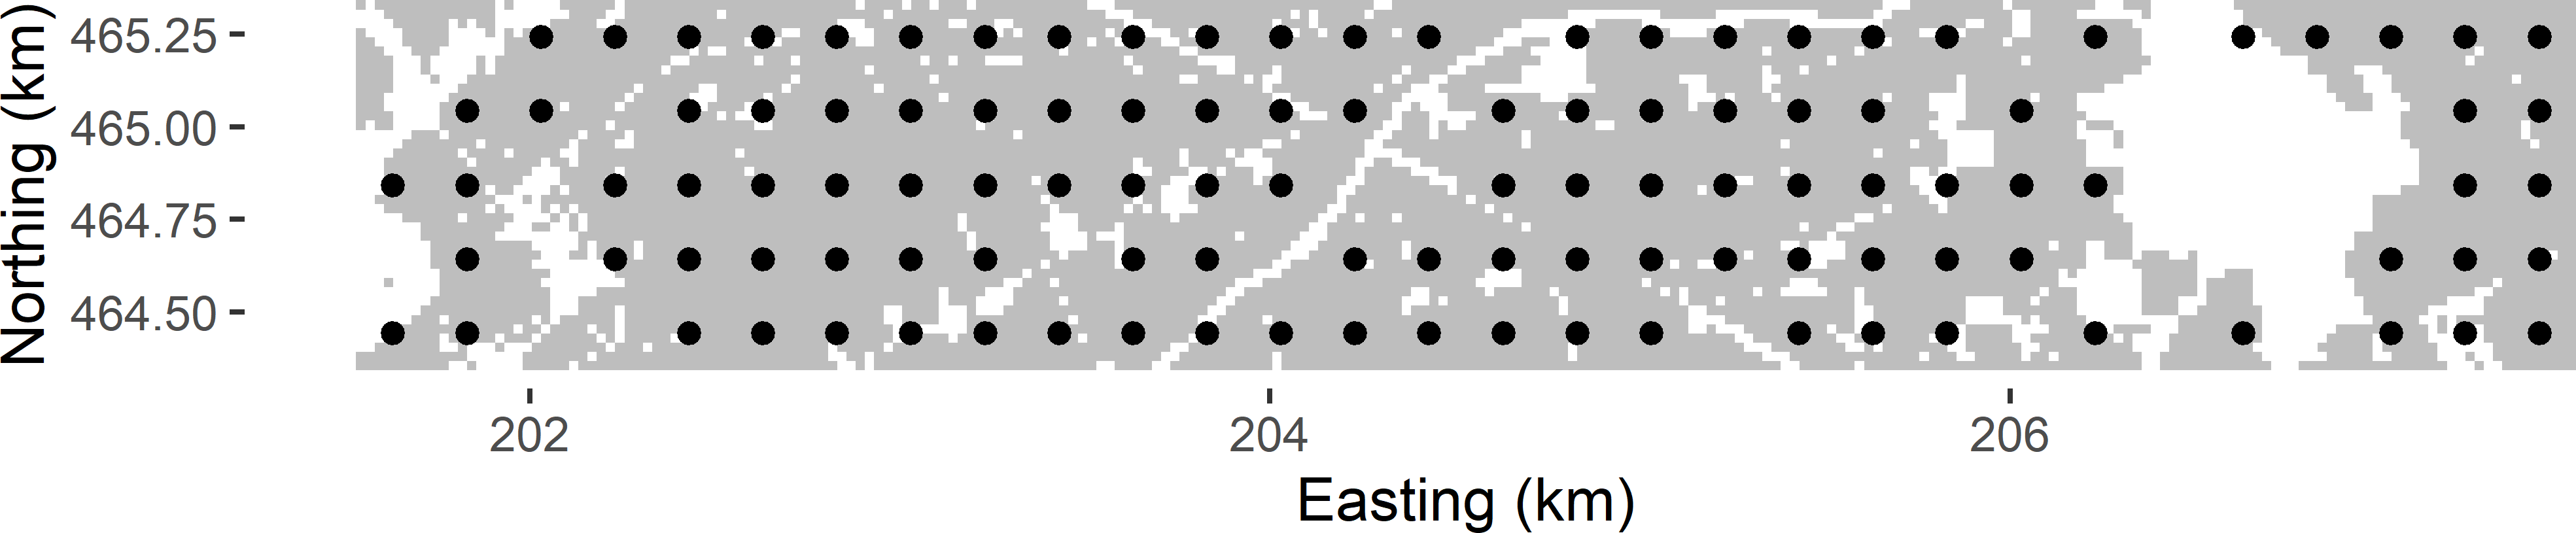 Non-random square grid sample with a grid spacing of 200 m from Voorst.